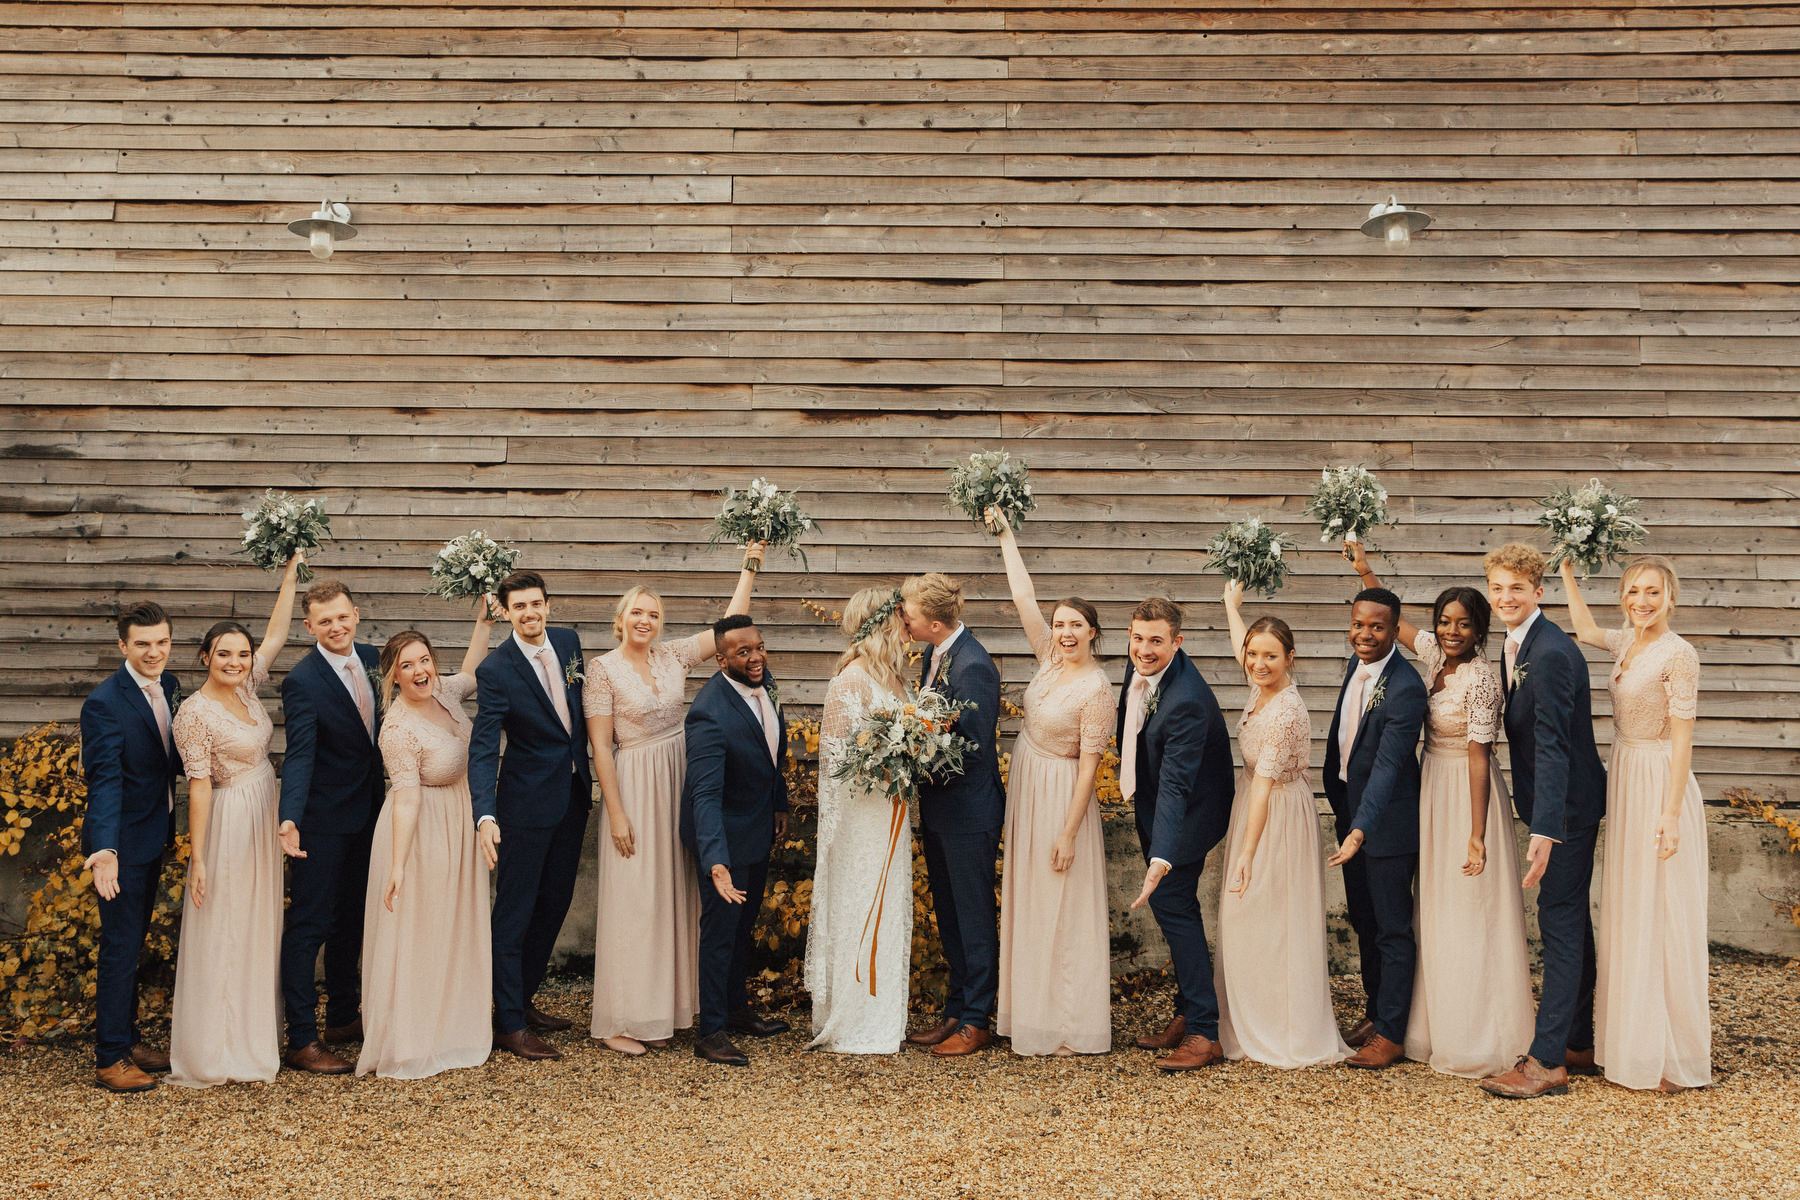 The groomsmen were wearing navy suits with blush ties just like the groom